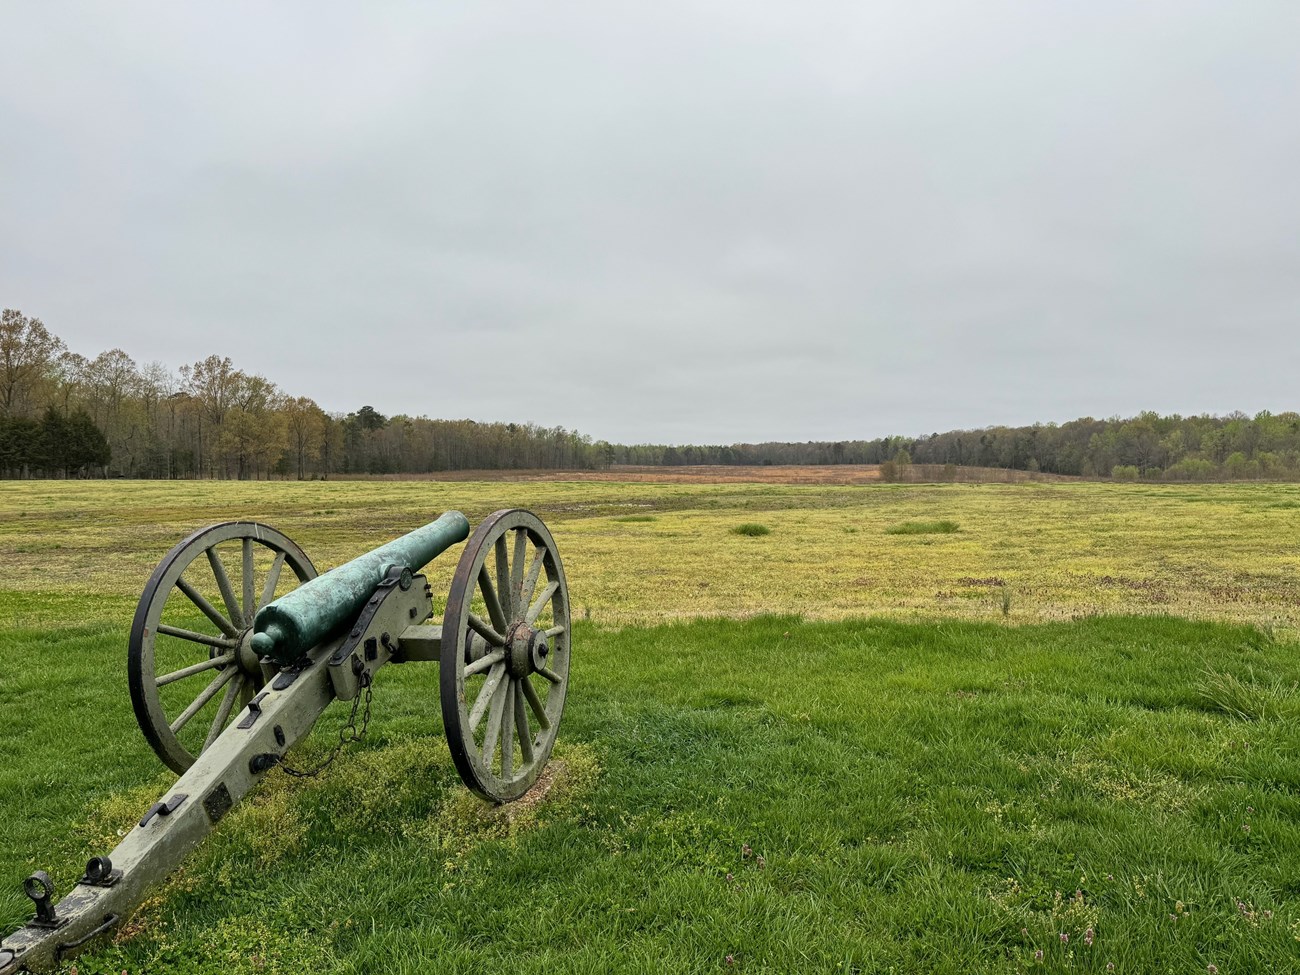 A canon sits in the forefront with a green and yellow field beyond